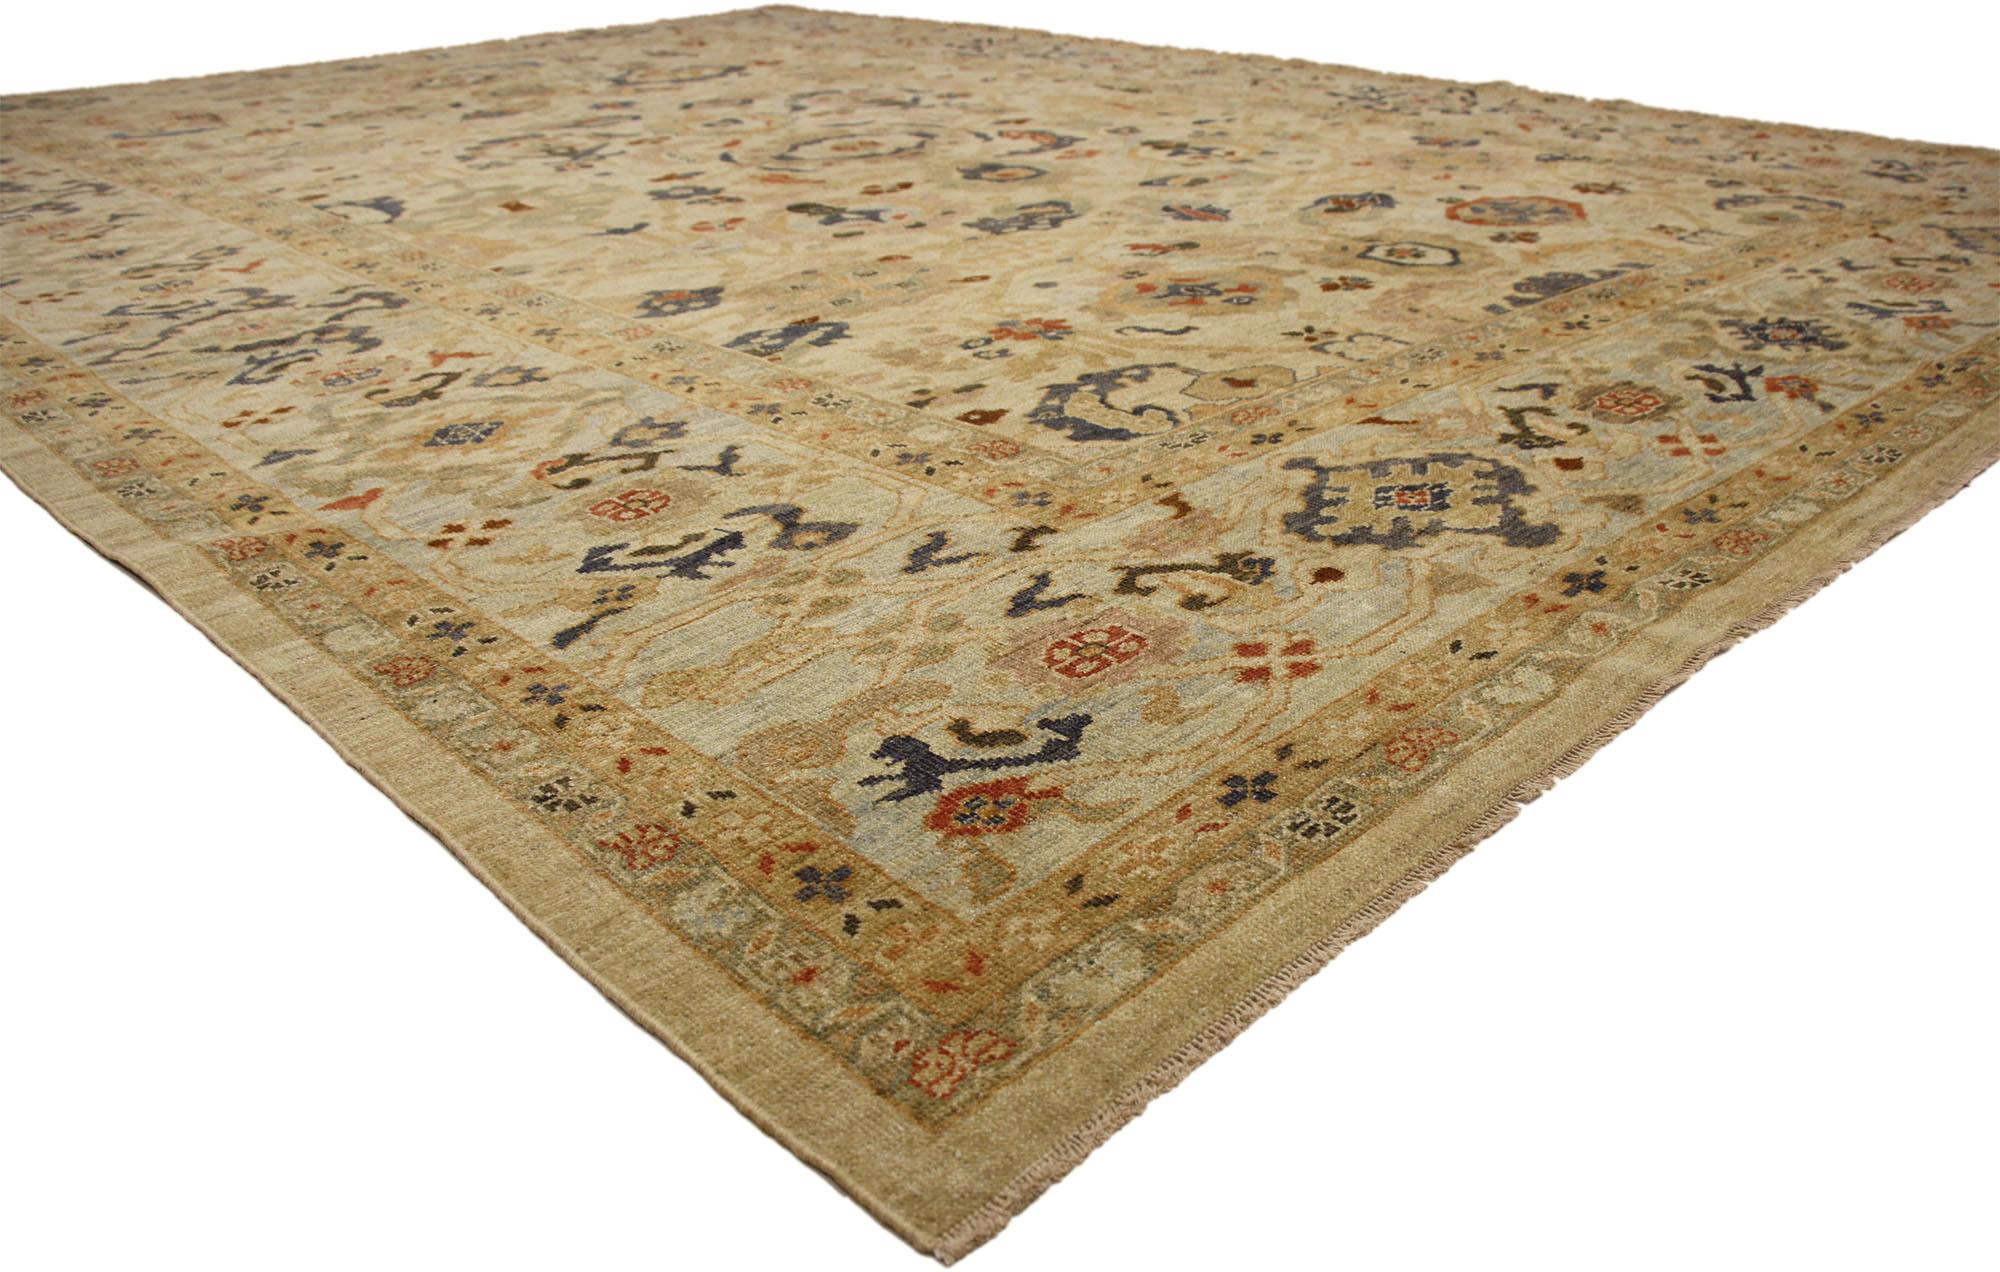 60711 Neoclassical Style Persian Sultanabad Area Rug with Federal Color Palette. With transitional style and harmonious hues, this modern Persian Sultanabad rug is sophisticated and subtle without sacrificing elegance. The Persian Sultanabad rug